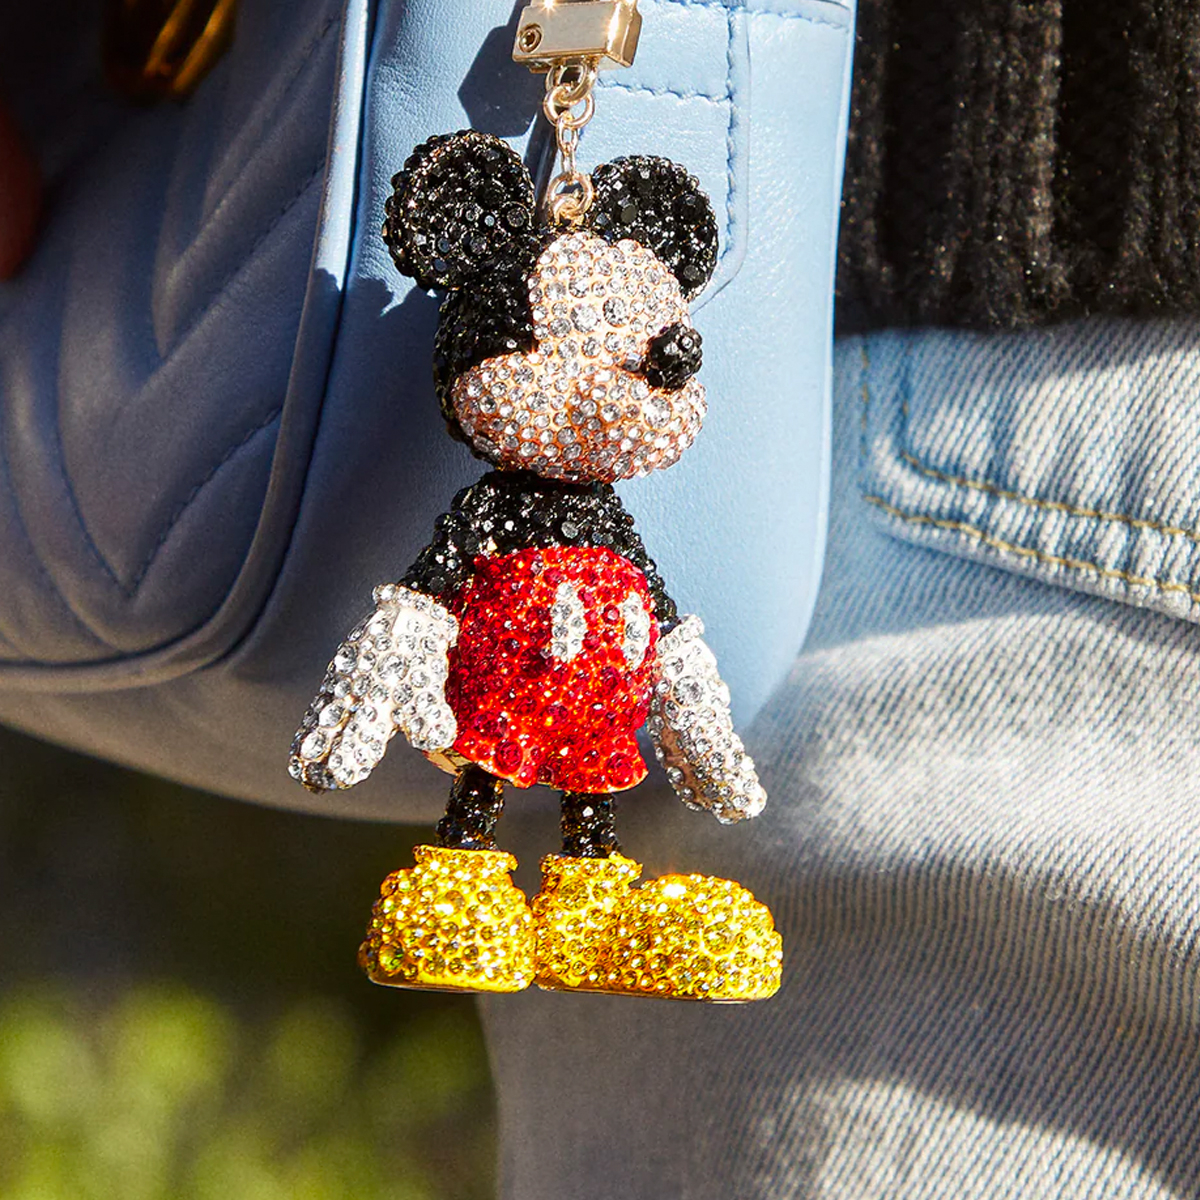 Jewelry shopping is more fun with Mickey Mouse! We're bringing